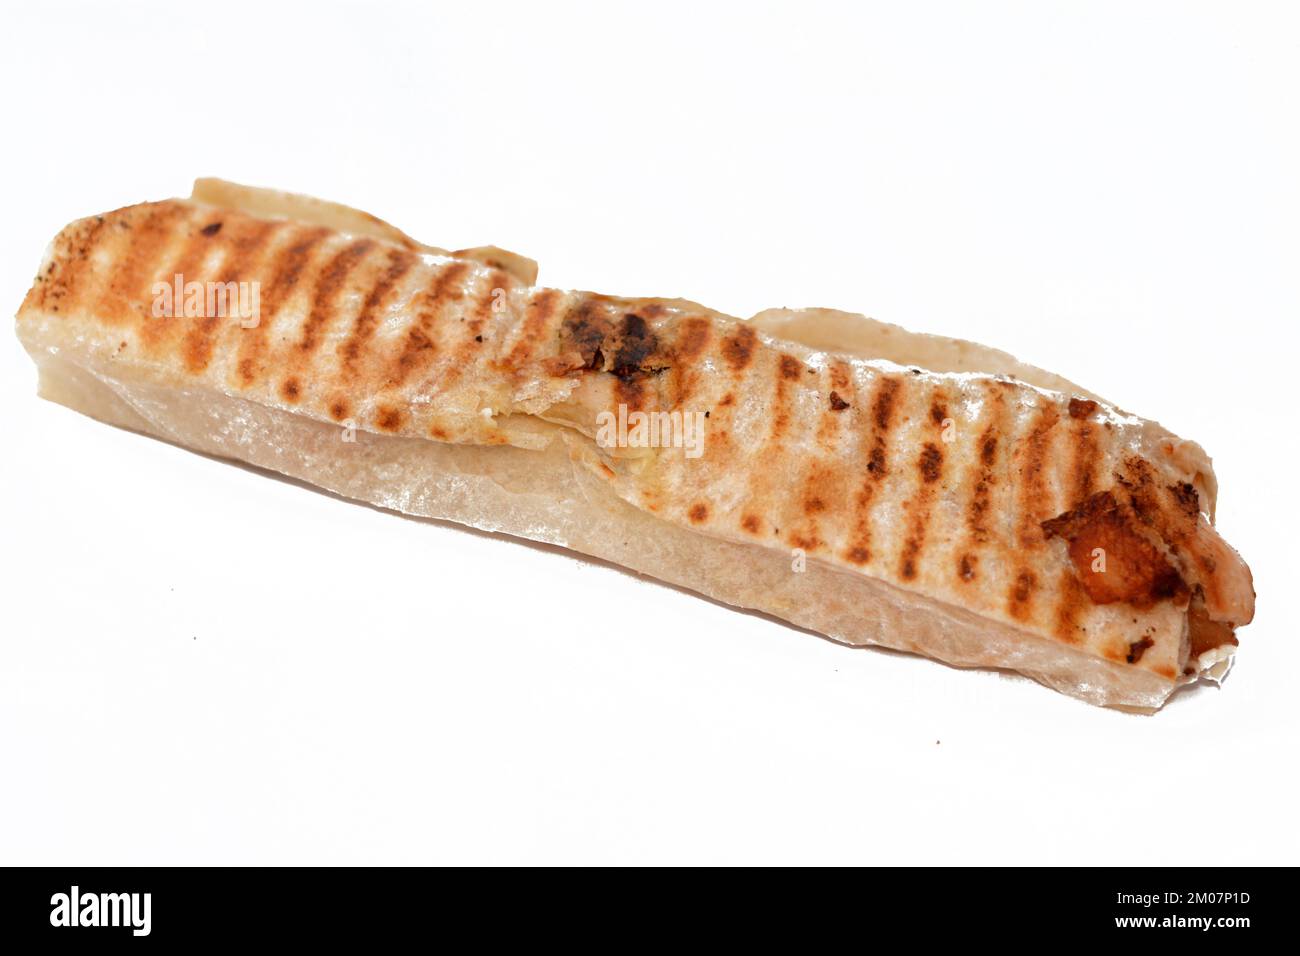 Syrian recipe cuisine background, chicken shawerma or shawarma tortilla wrap with onion, tomato, lettuce and garlic sauce in Syrian bread isolated on Stock Photo